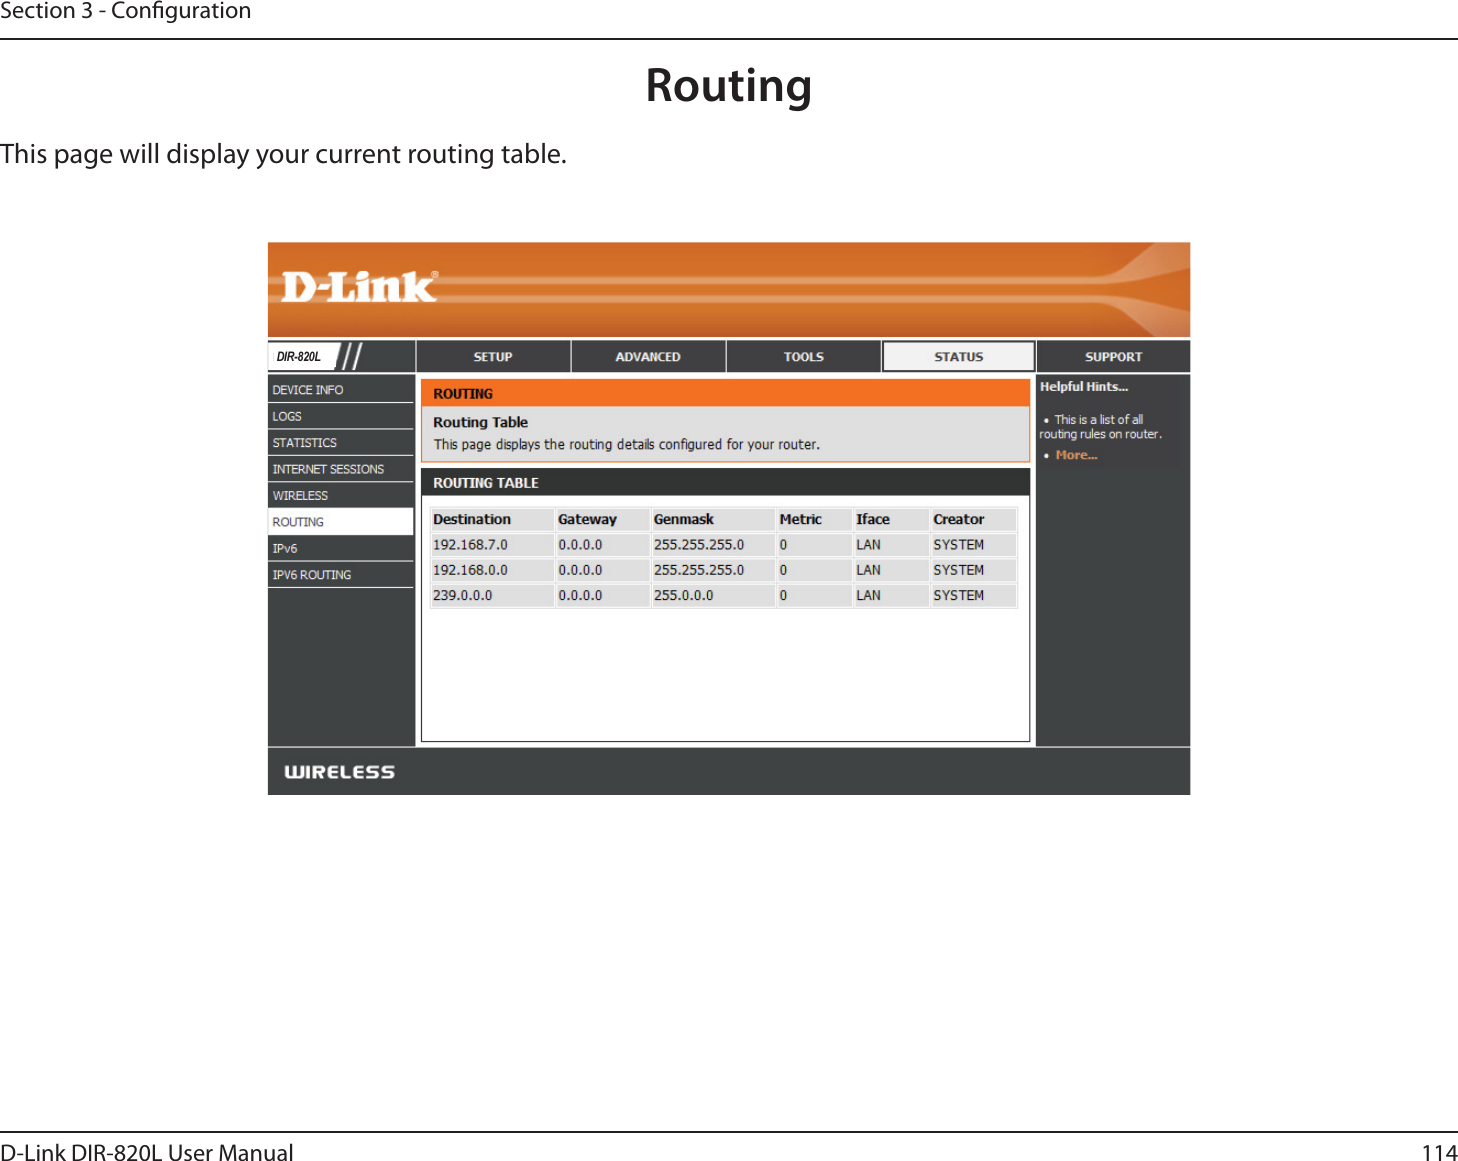 114D-Link DIR-820L User ManualSection 3 - CongurationRoutingThis page will display your current routing table.&apos;,5/